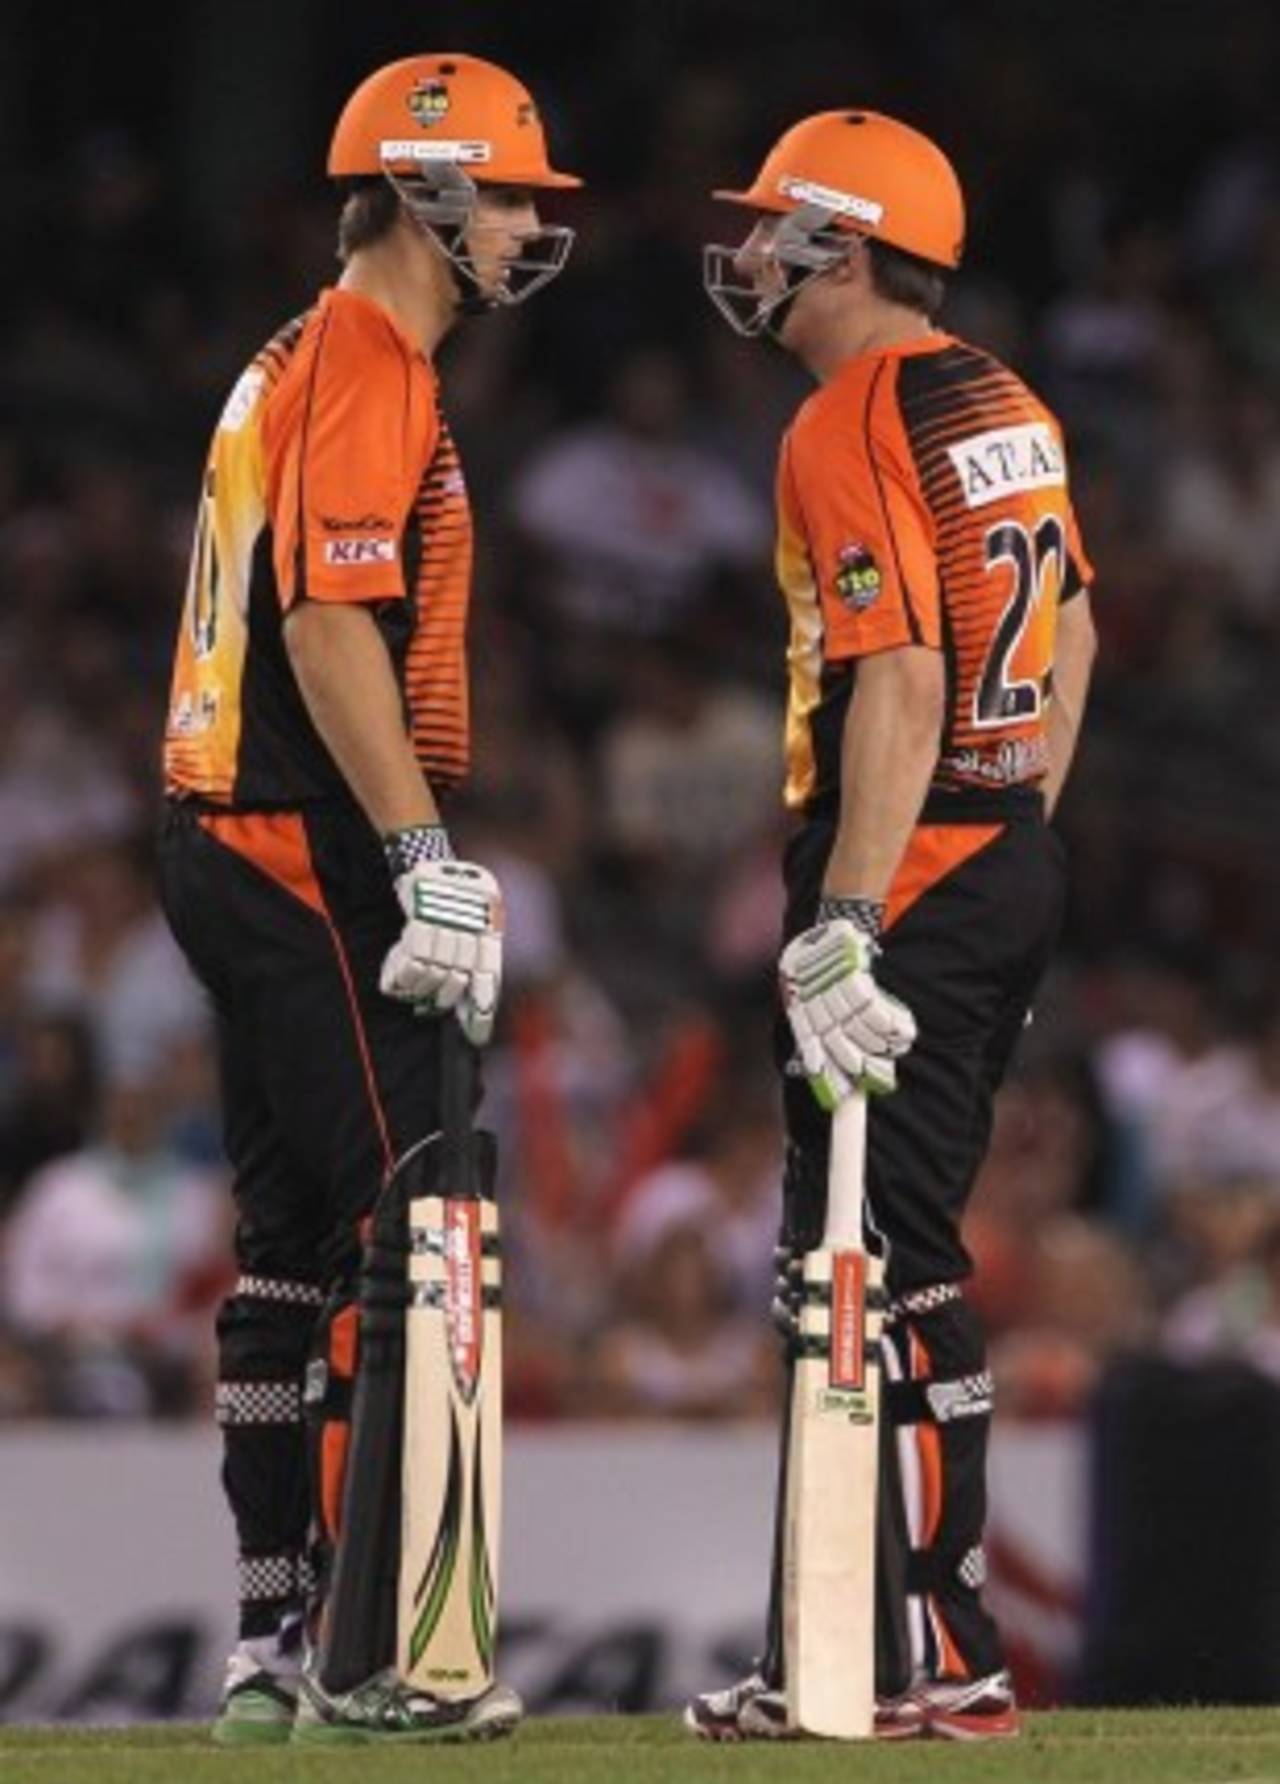 Mitchell and Shaun Marsh were dropped by the Perth Scorchers after a big night out&nbsp;&nbsp;&bull;&nbsp;&nbsp;Getty Images